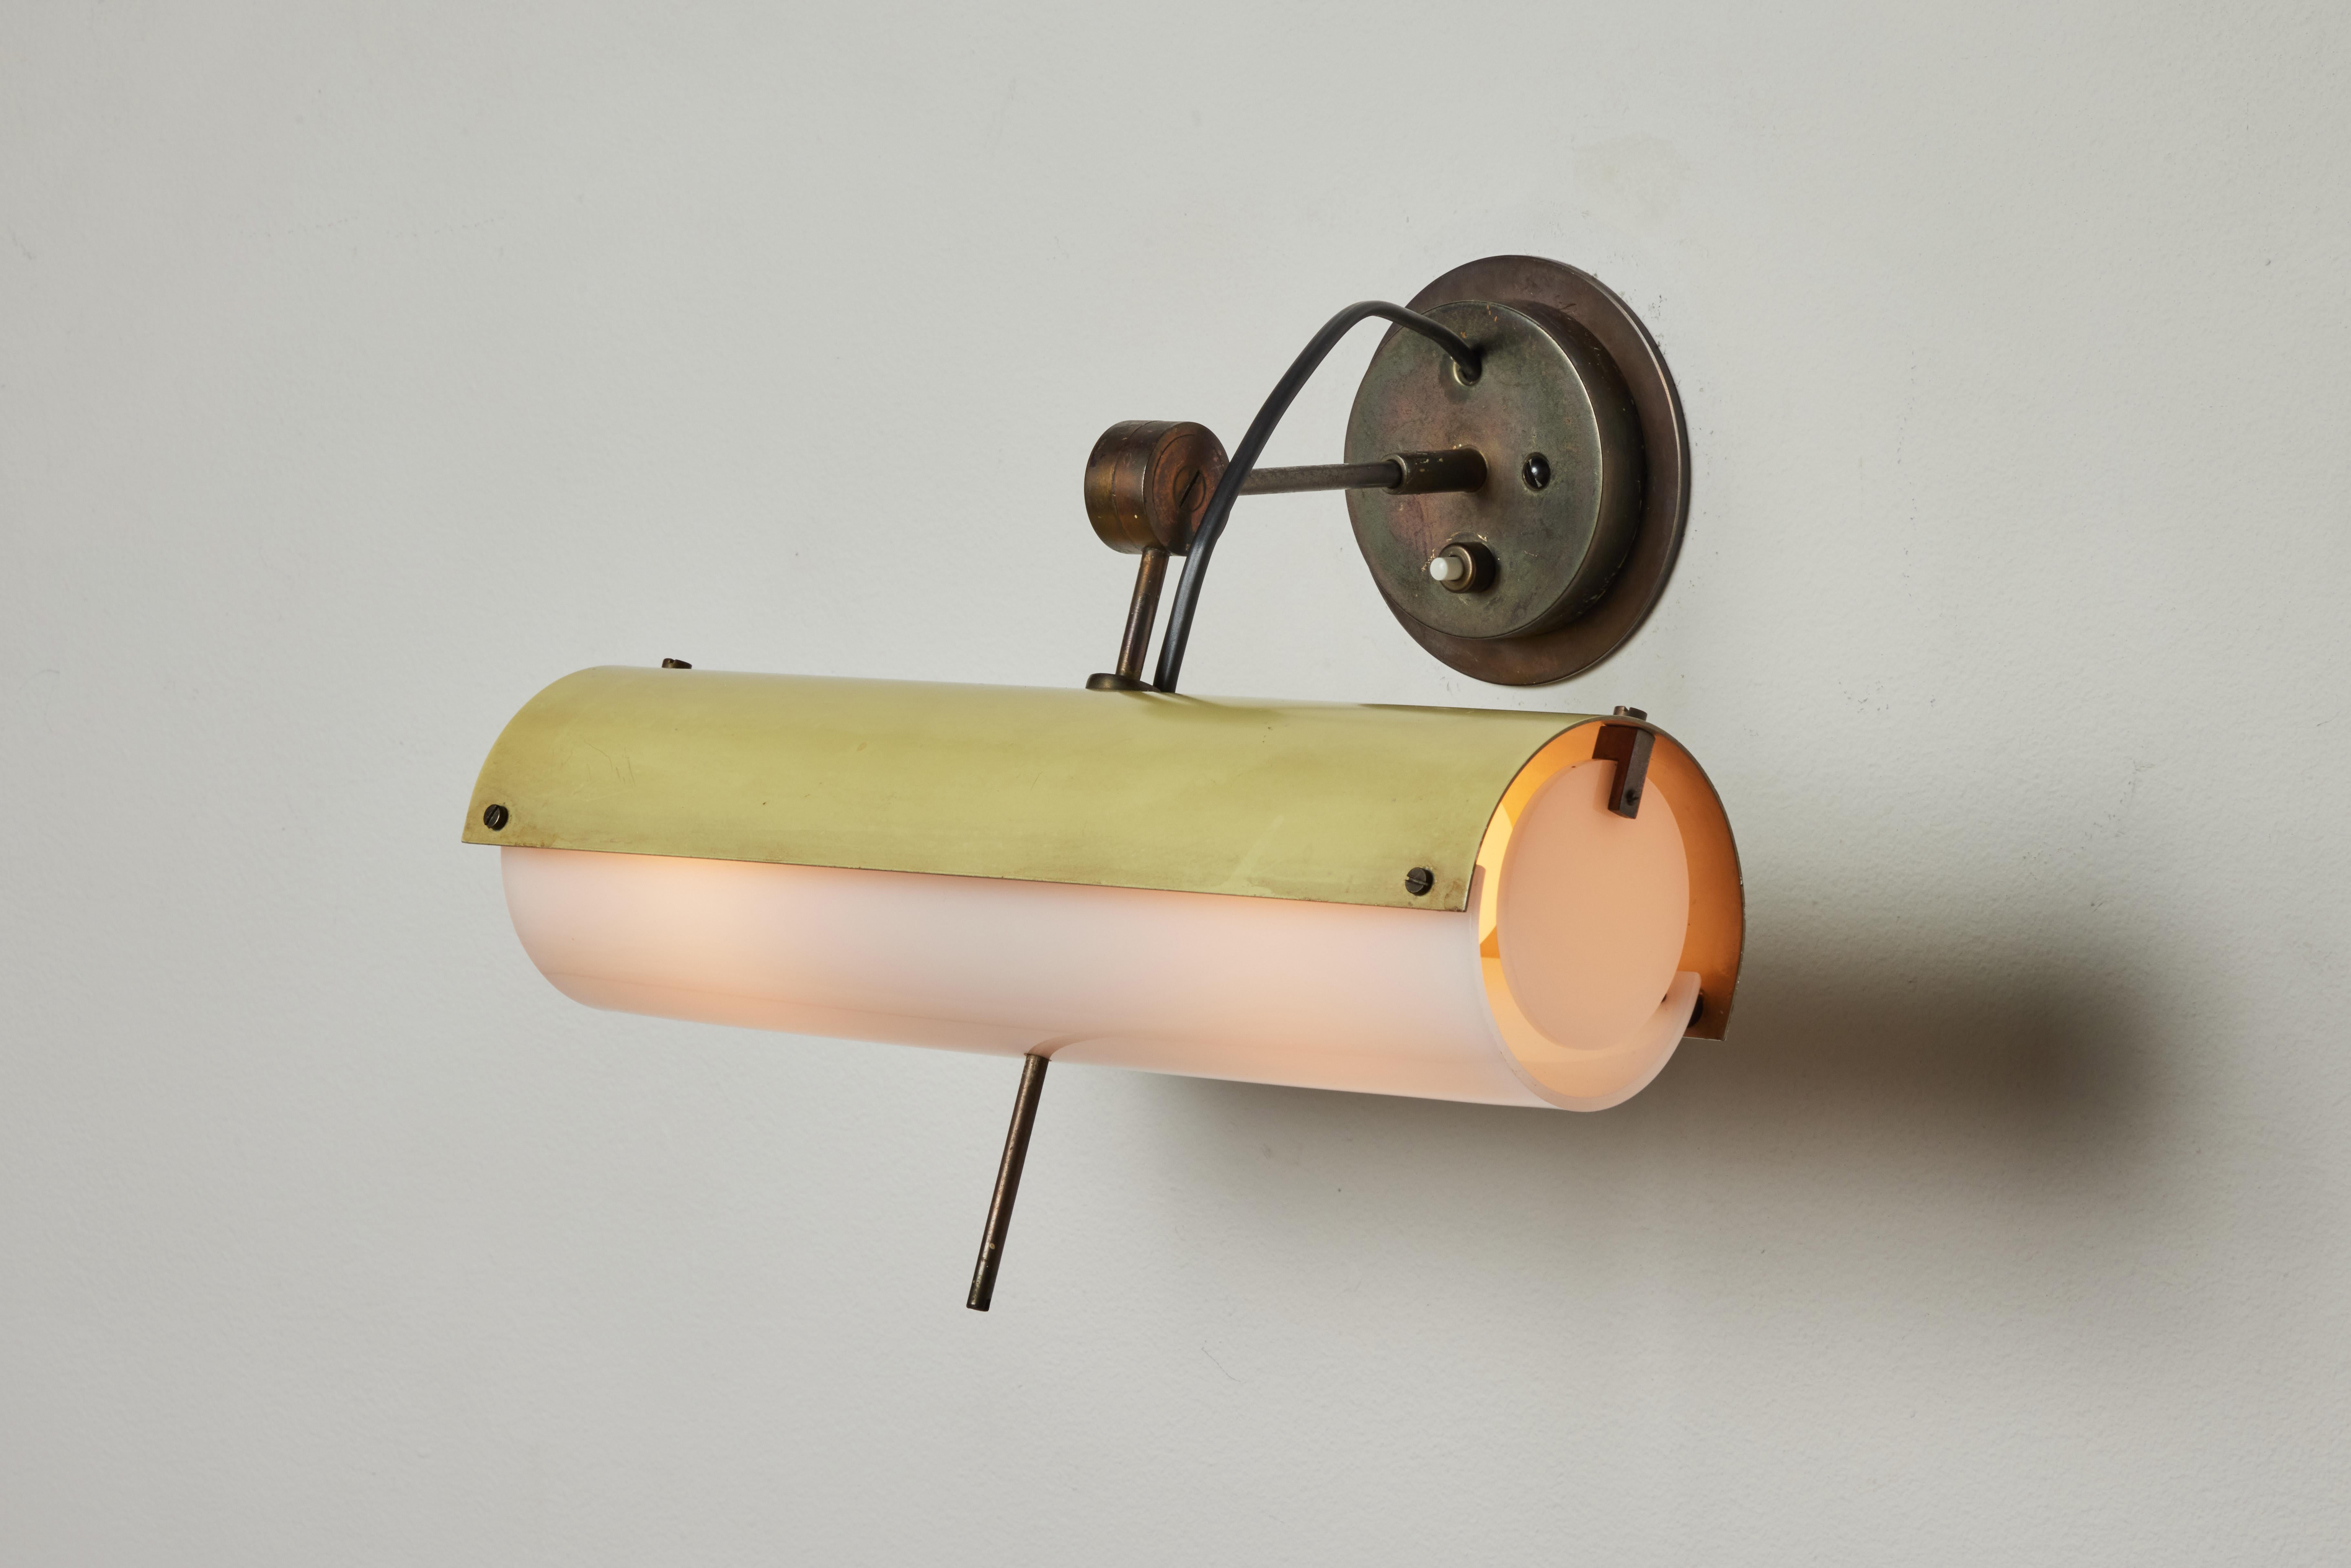 Rare single sconce by Giussepe Ostuni for Oluce. Designed and manufactured in Italy, circa 1950's. Painted metal, acrylic. Custom brass backplate. Wired for U.S. standards. Adjust positions. Takes one E27 75 w maximum bulb. Bulbs not included.